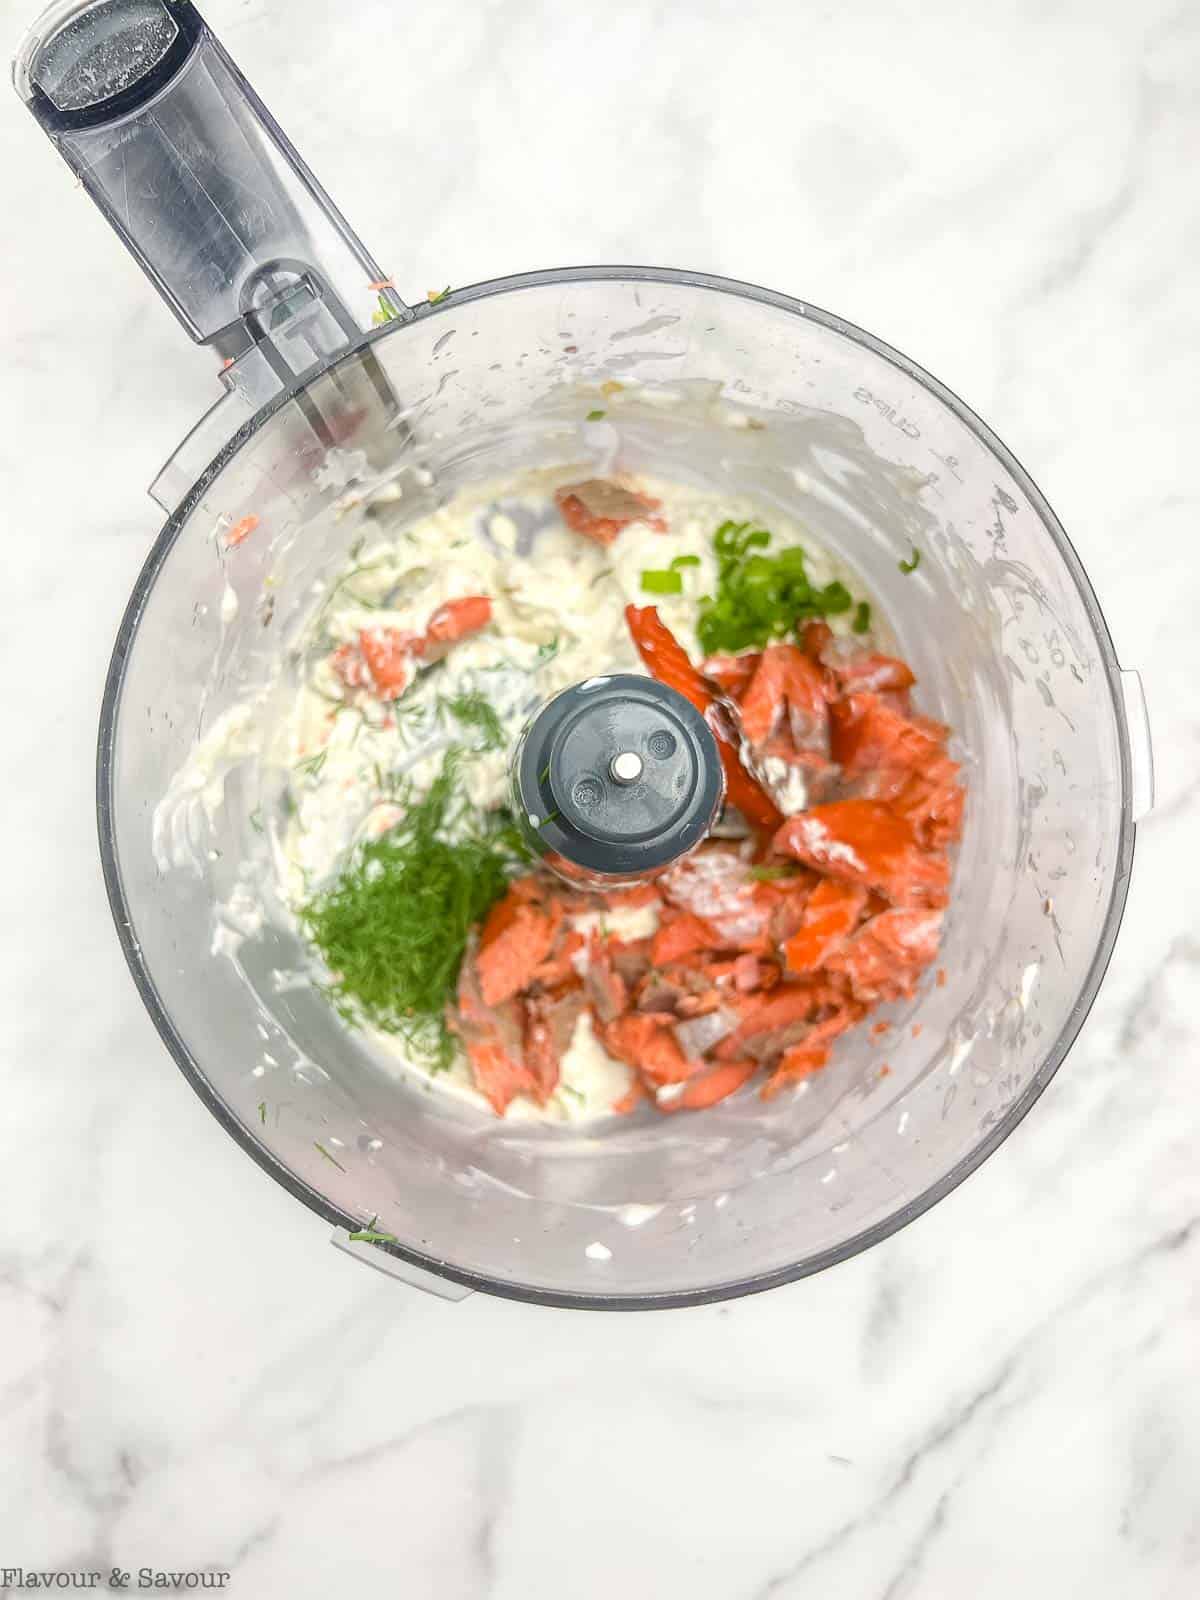 Adding smoked salmon, dill and green onions to dip in food processor.